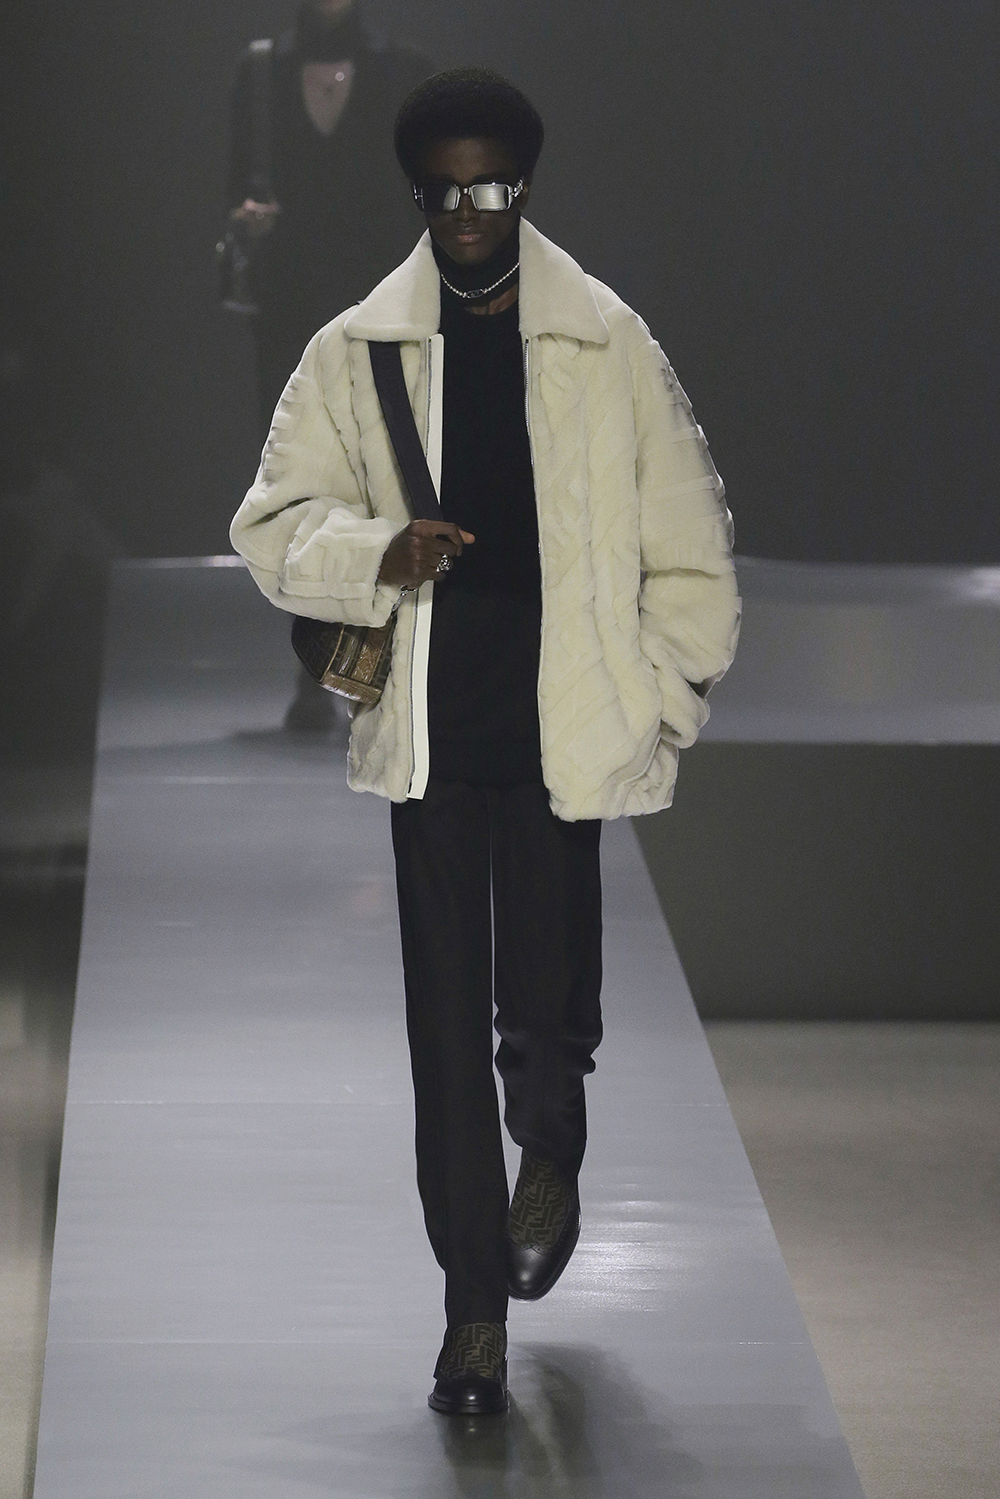 Fendi Men’s Fall/Winter 2022-23 Collection runway show in post